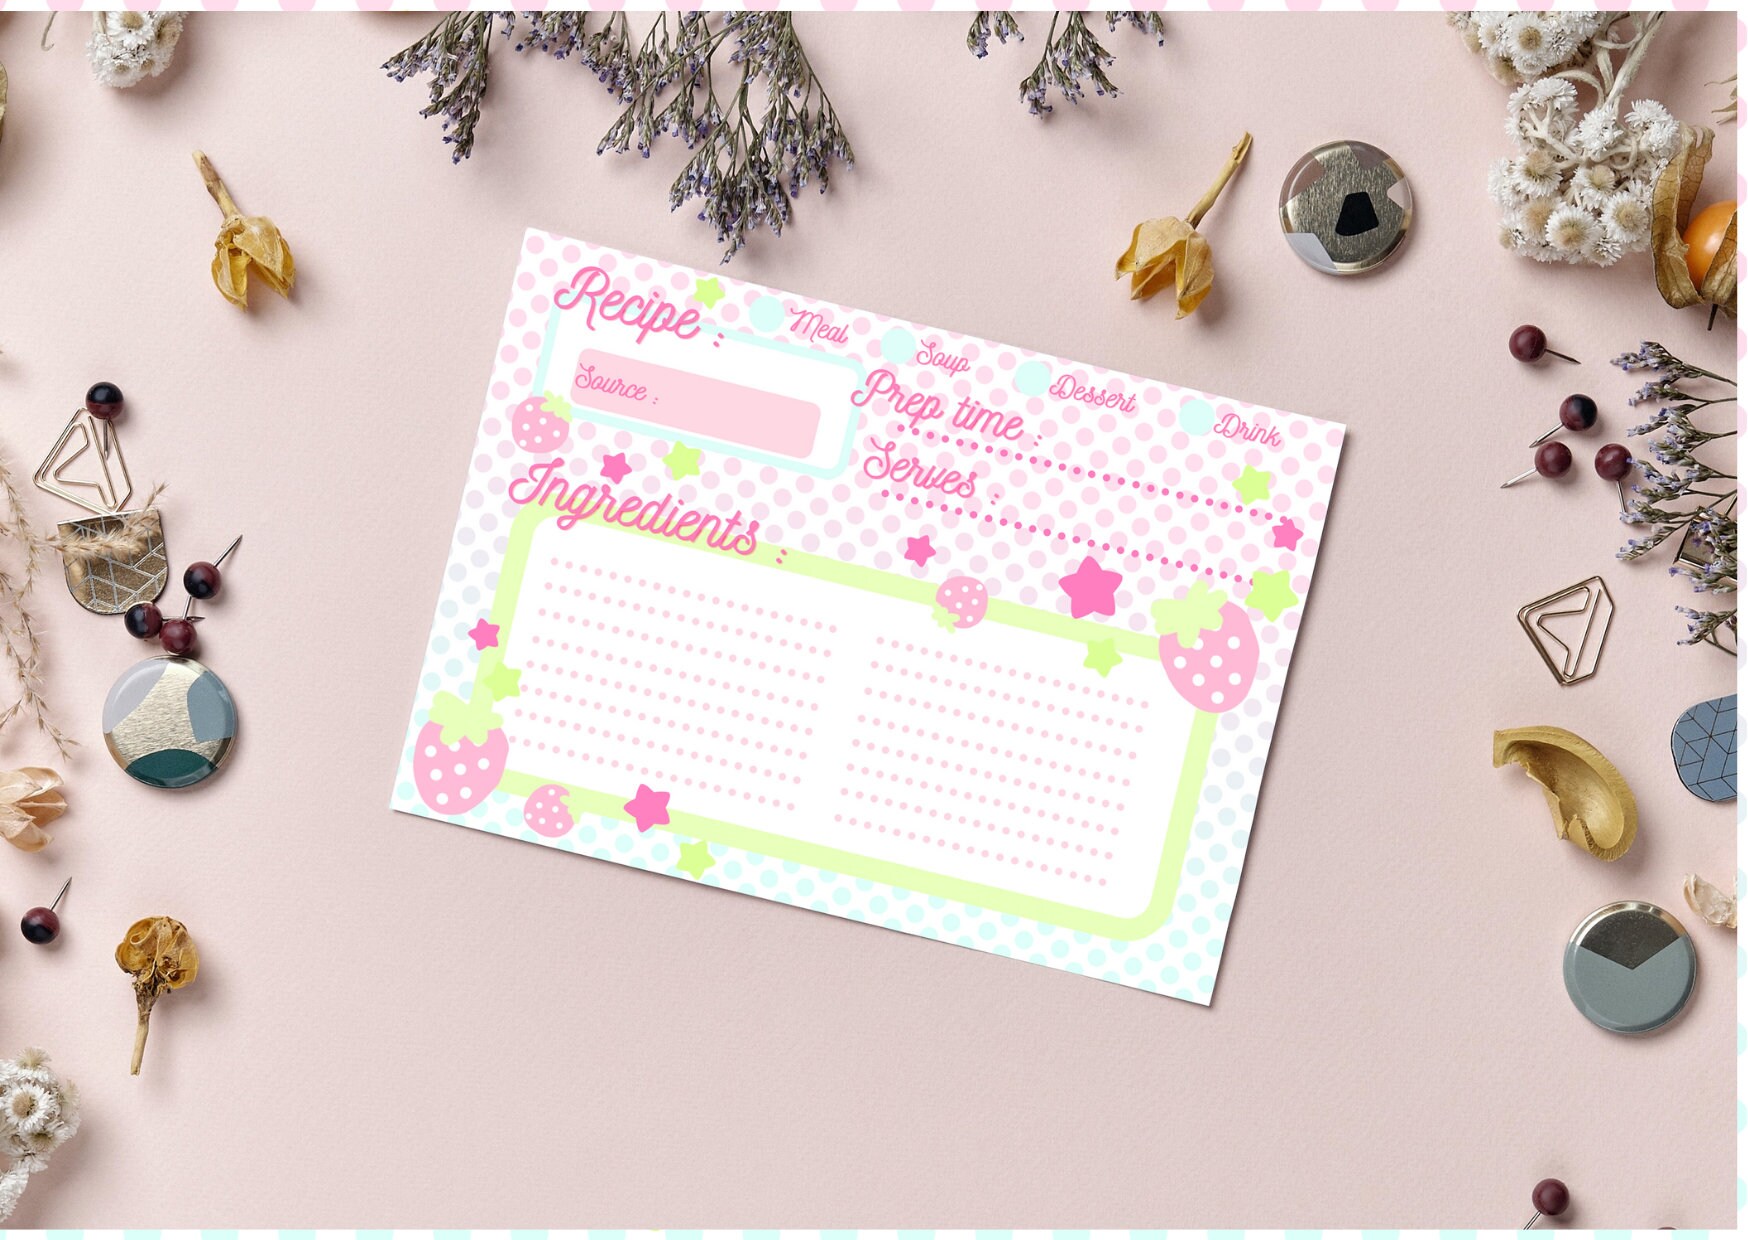 Brown and Pink Polka Dots Personalized Recipe Cards